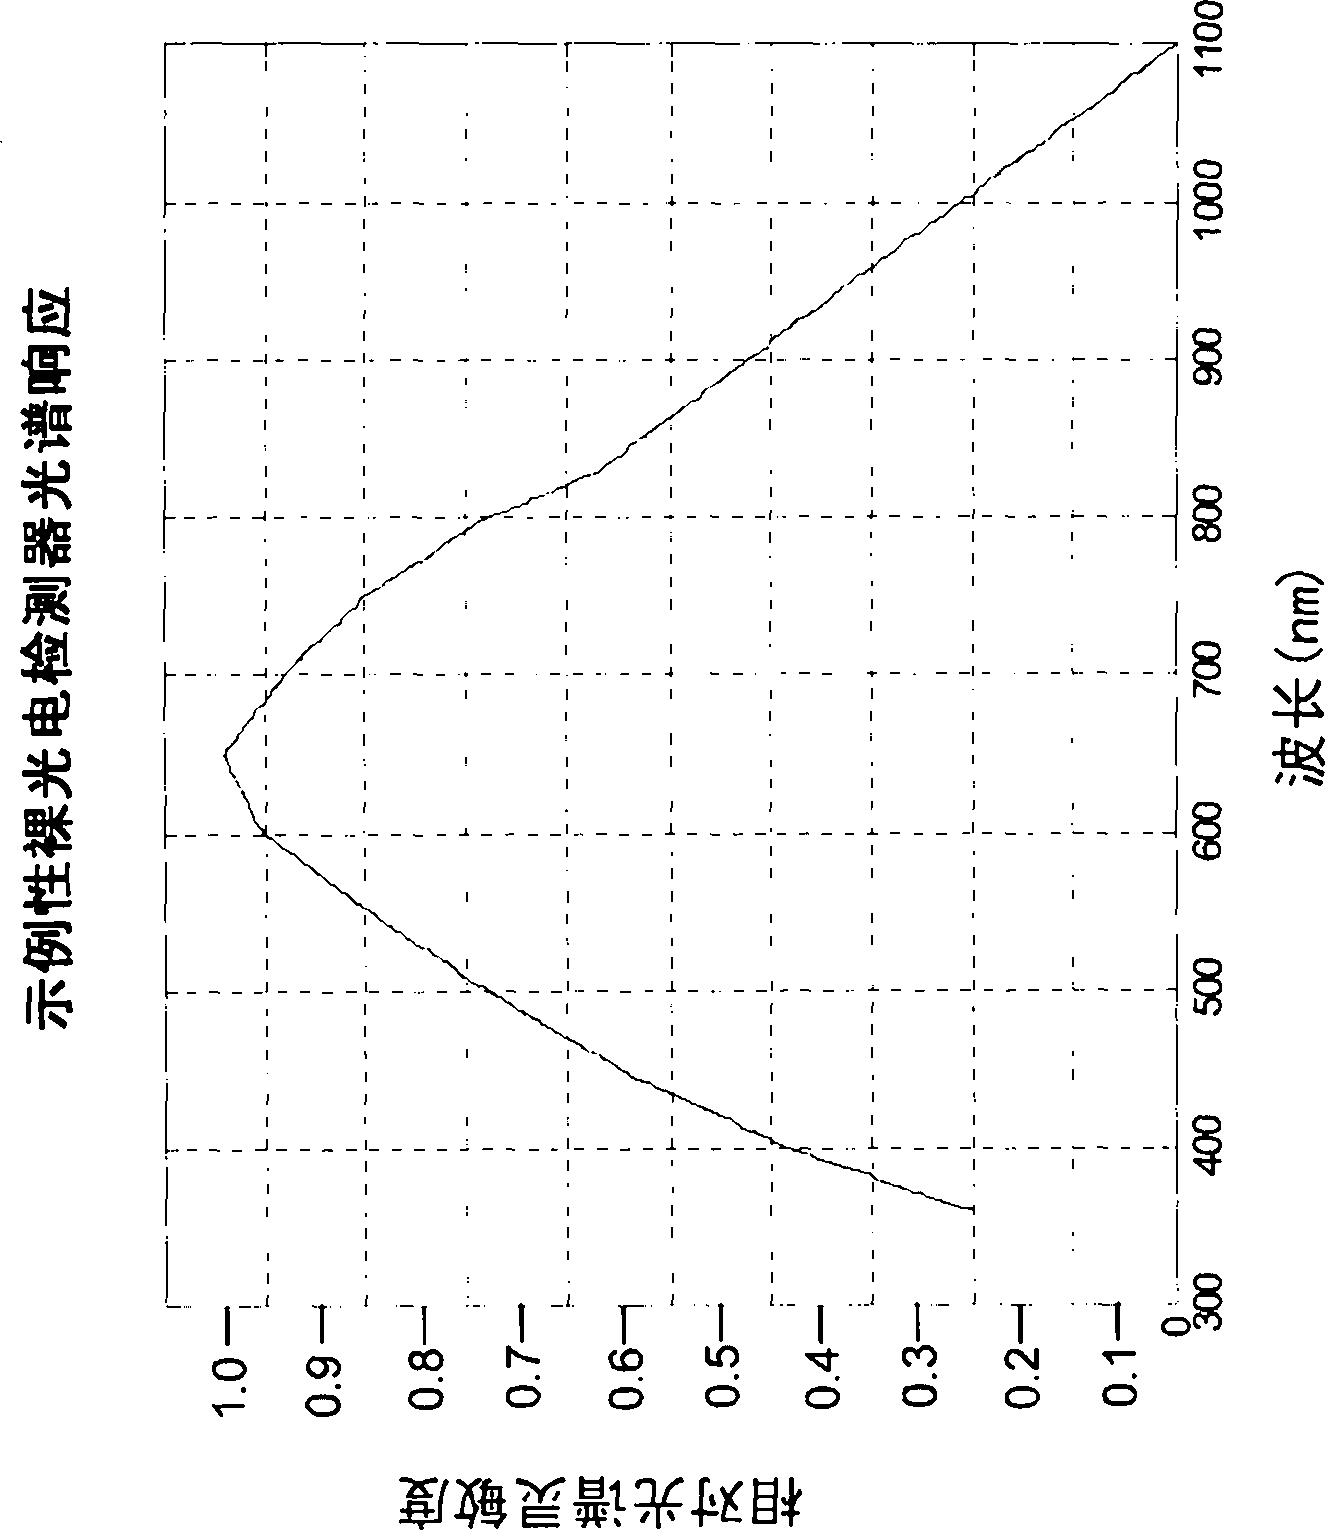 Adaptive analog subtraction-containing circuit, method, subsystem, and system used for optical sensing